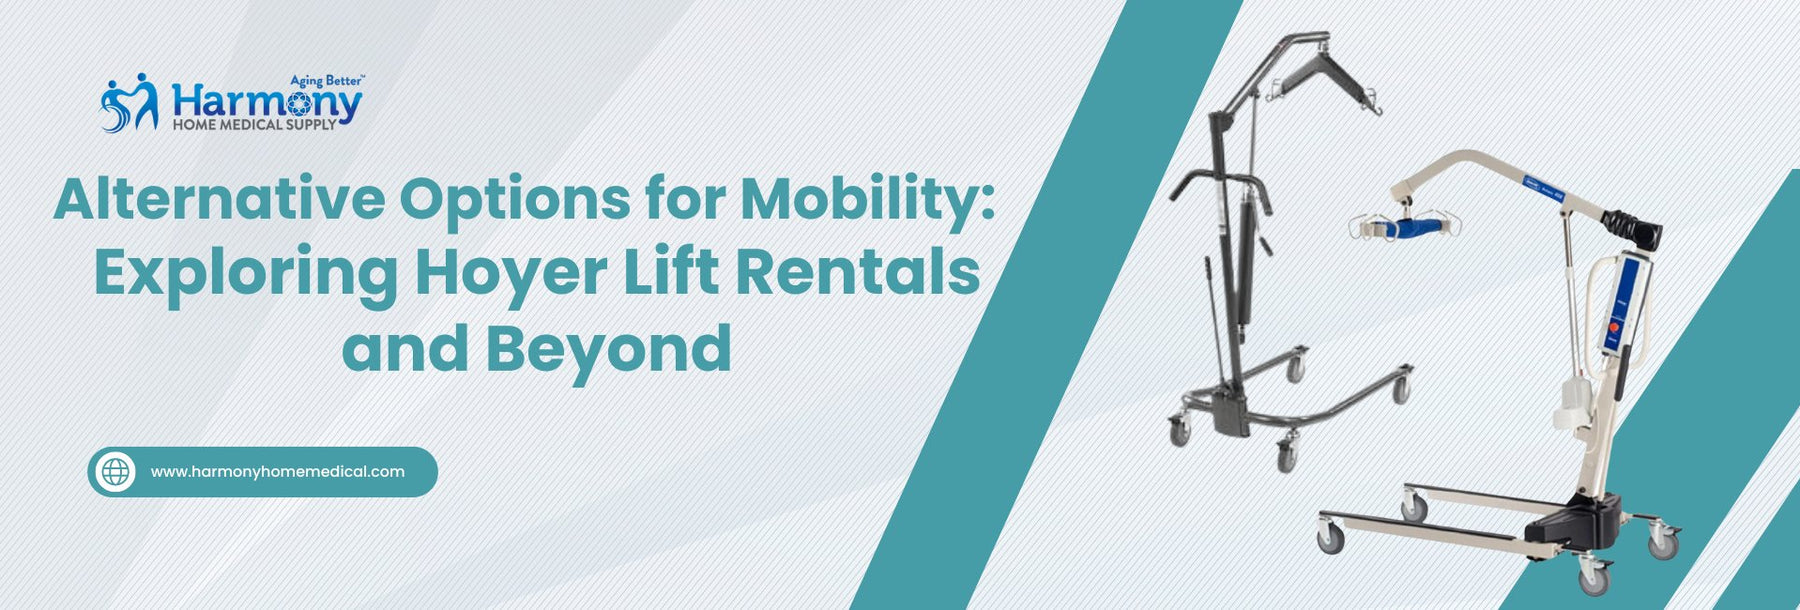 Alternative Options for Mobility: Exploring Hoyer Lift Rentals and Beyond - Harmony Home Medical Supply